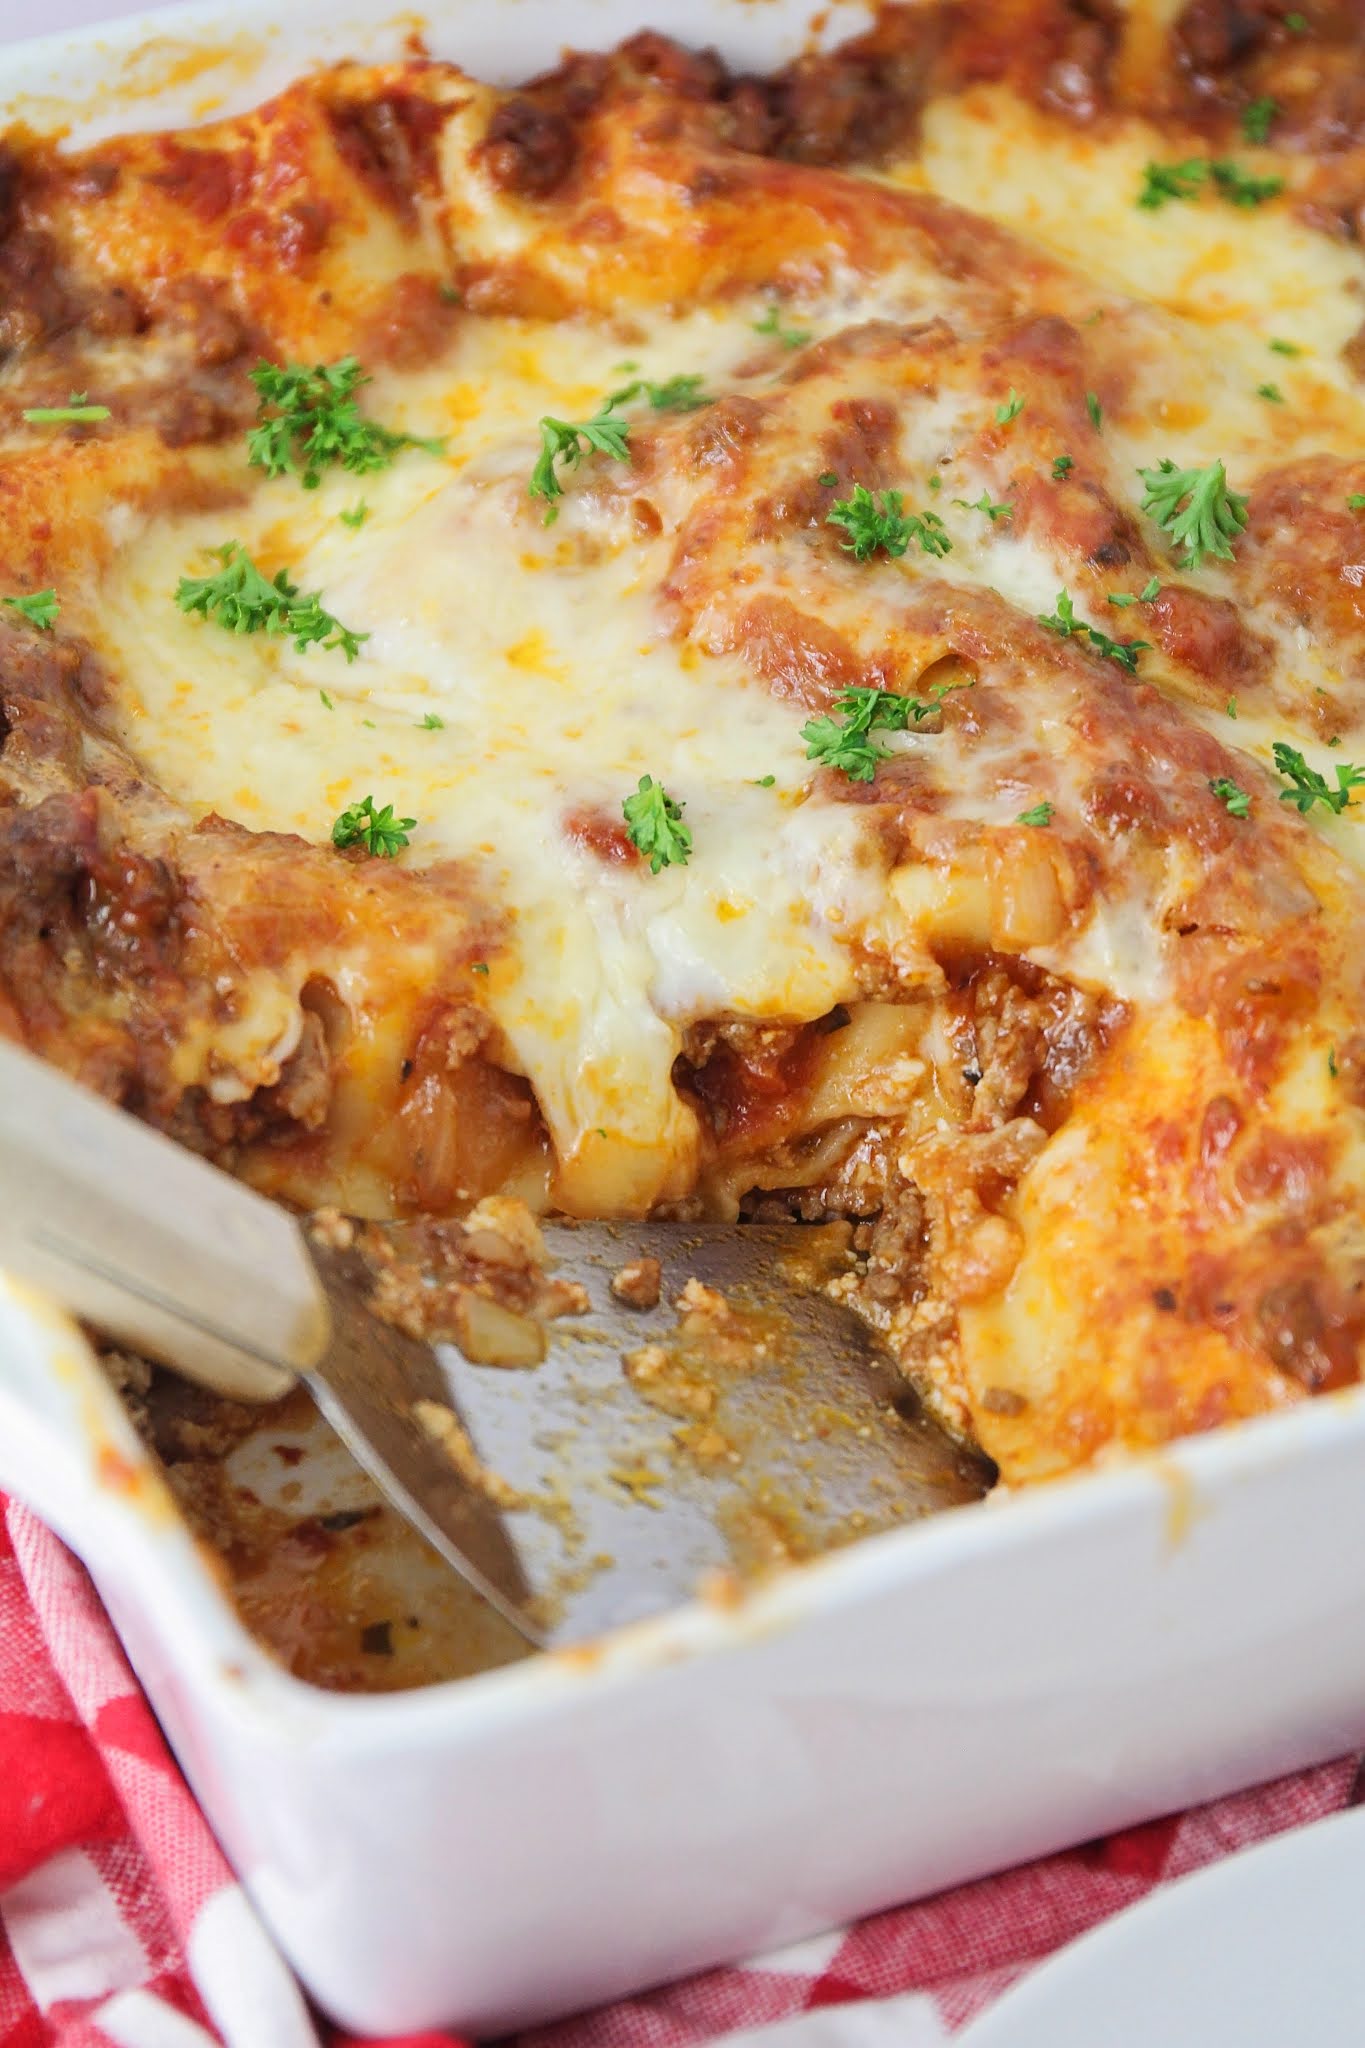 This delicious lasagna is truly the best! The recipe makes two pans, so it's easy to bake one and put another in the freezer for later!